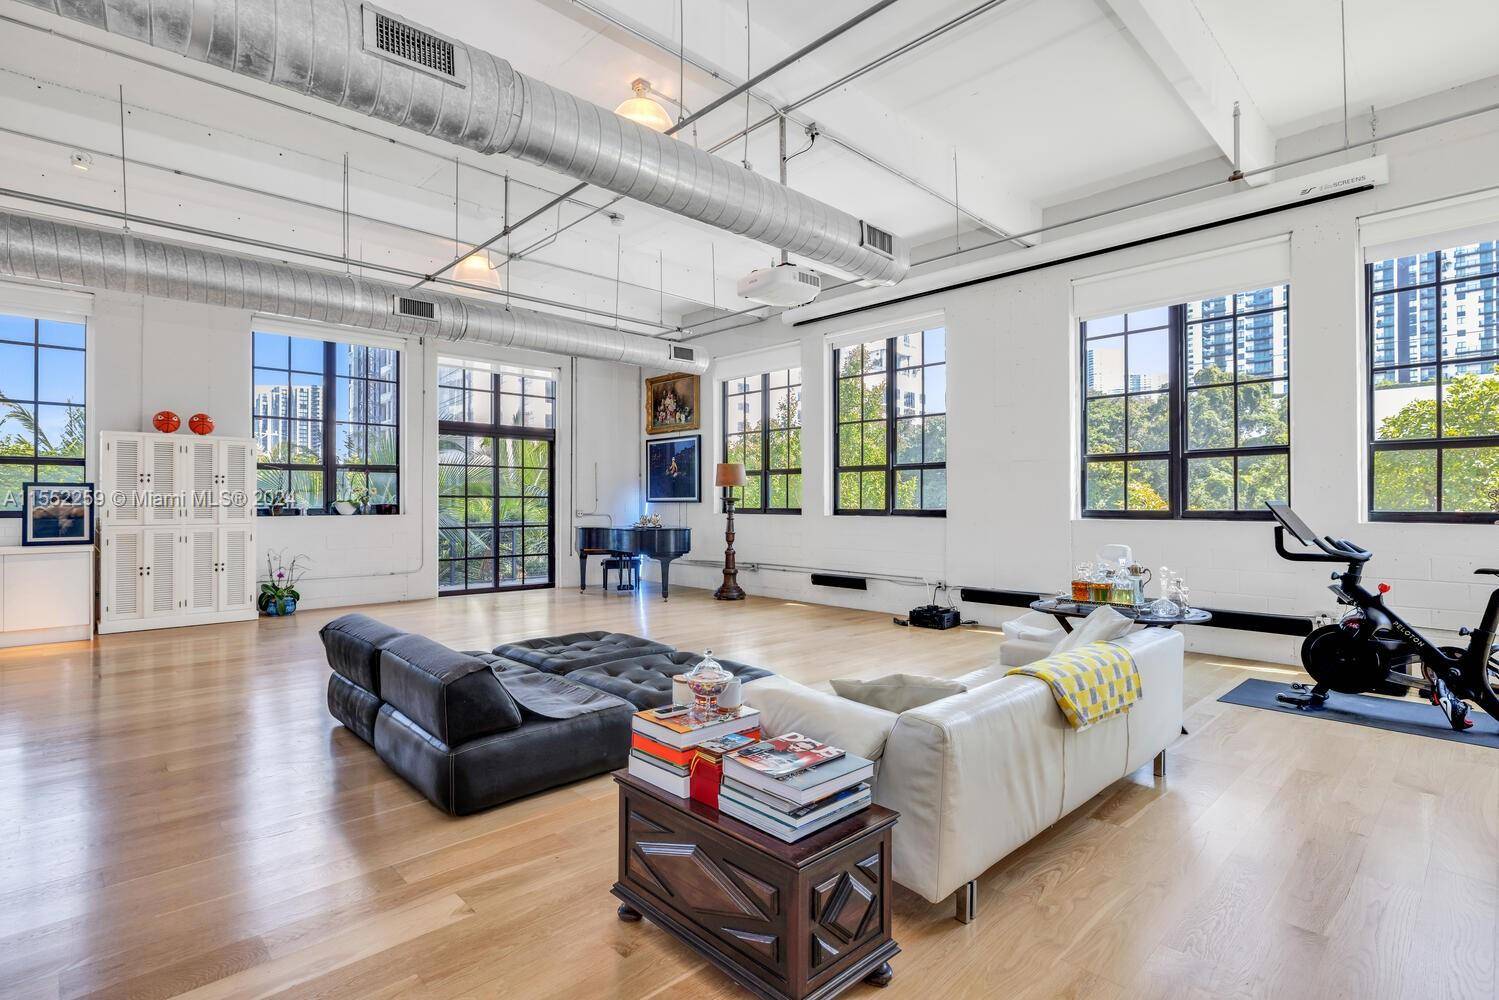 Also available for Sale. Discover the epitome of urban living in this exceptional New York style loft condo, a rarity in Miami's Arts Entertainment district minutes away from Wynwood, Downtown, ...